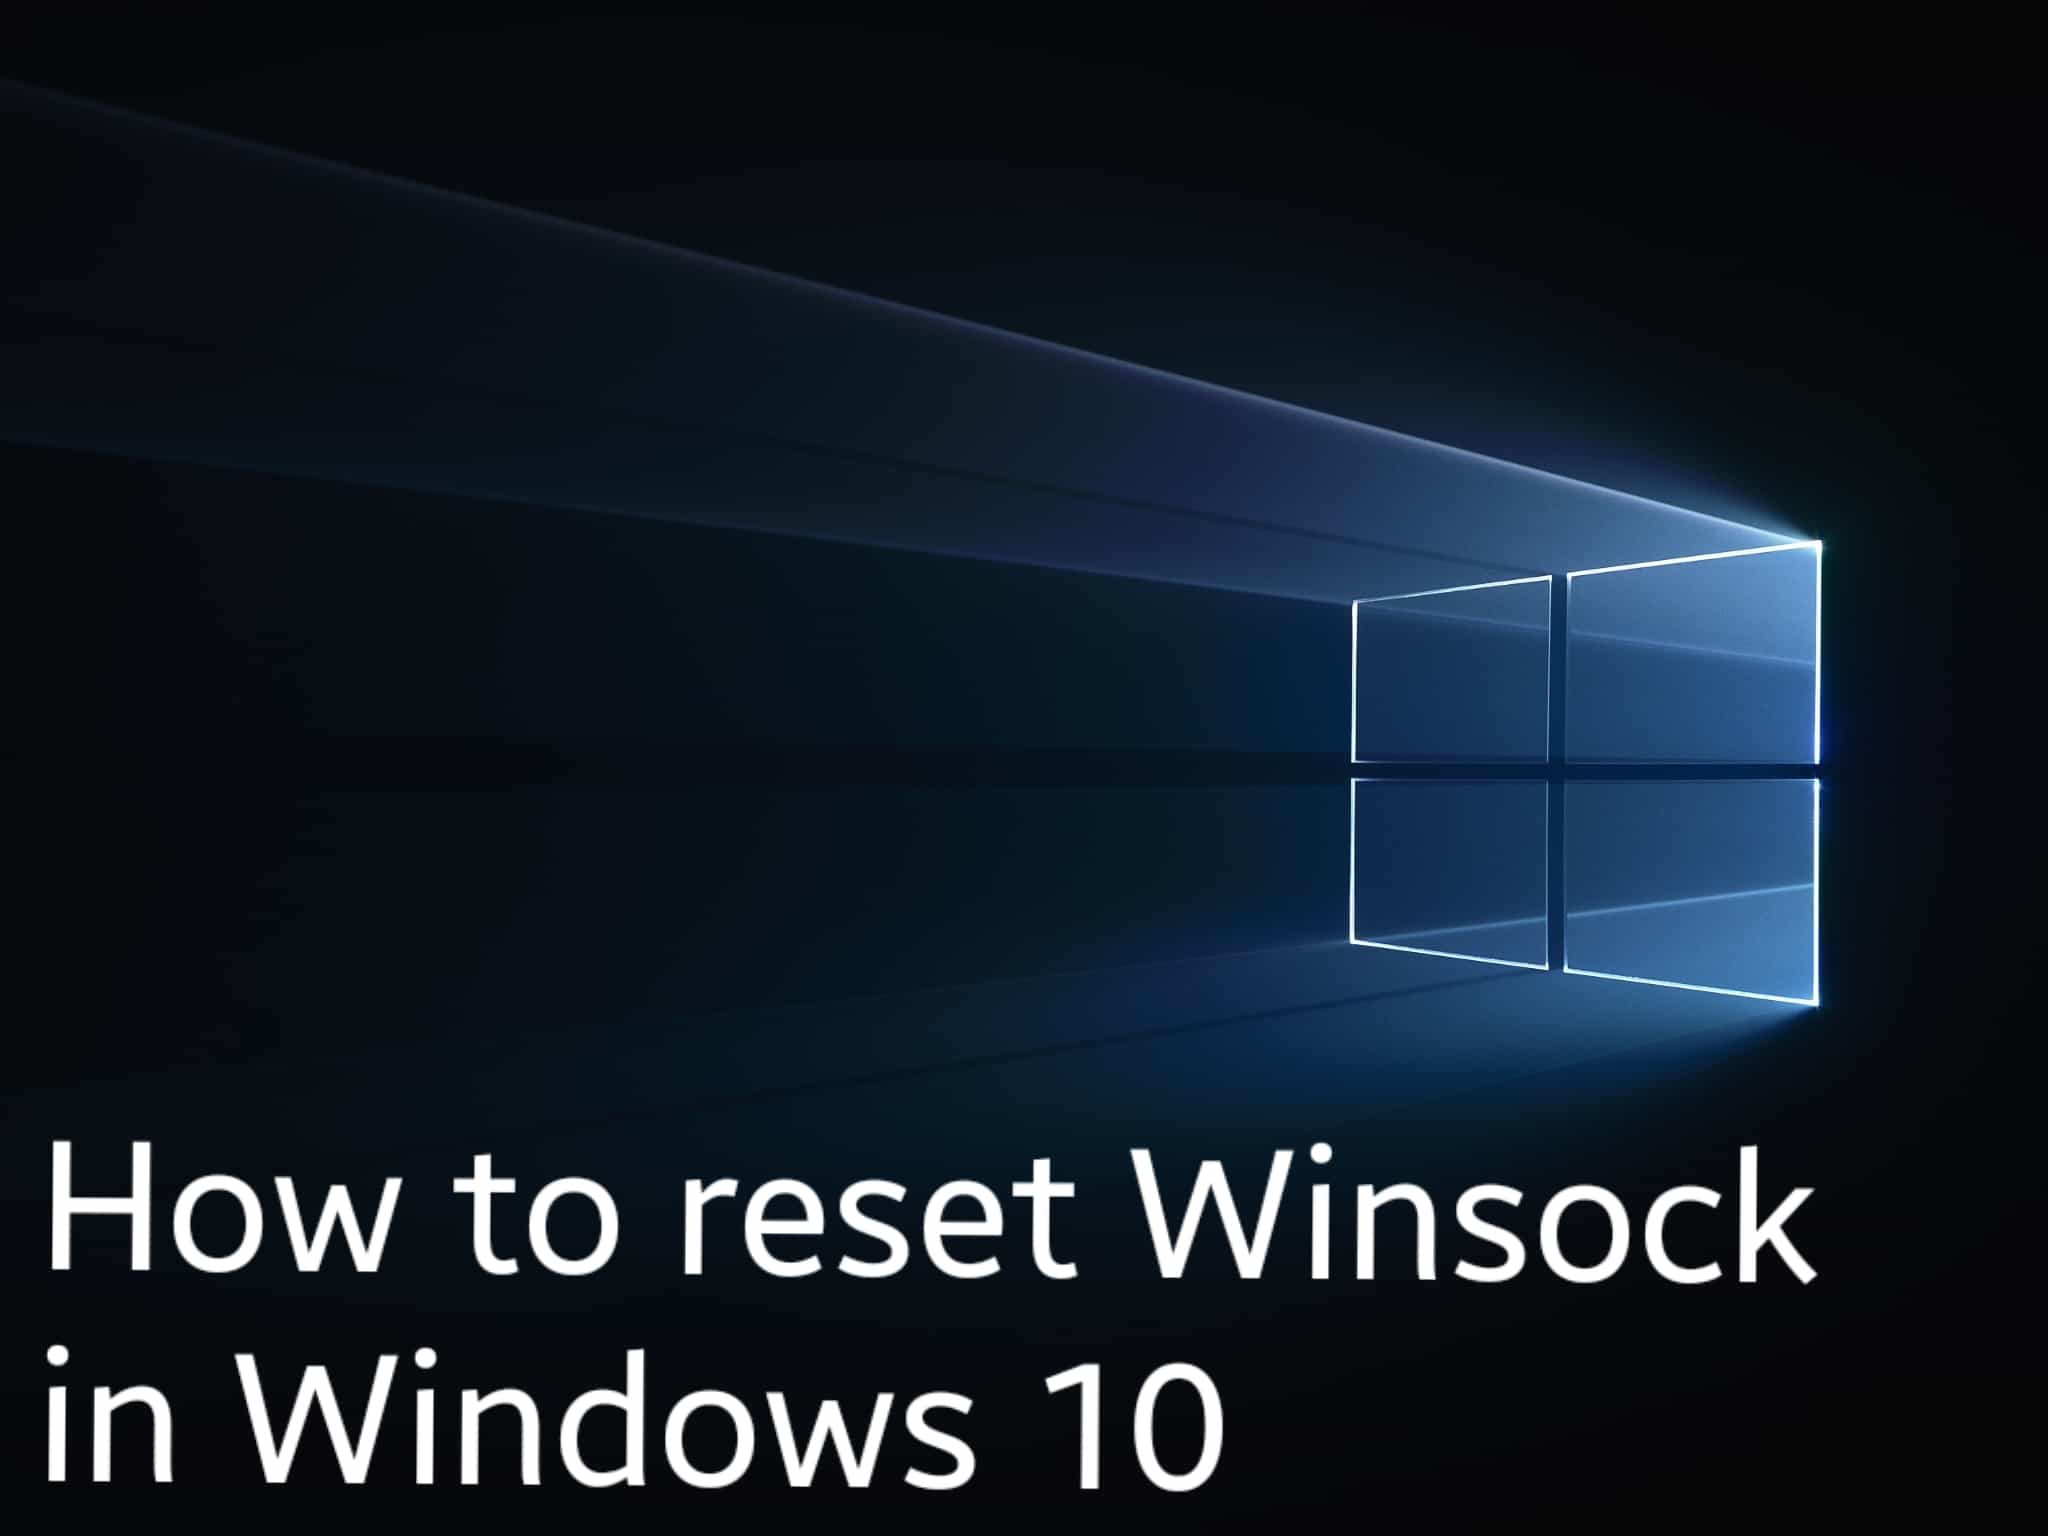 How to reset Winsock in Windows 10